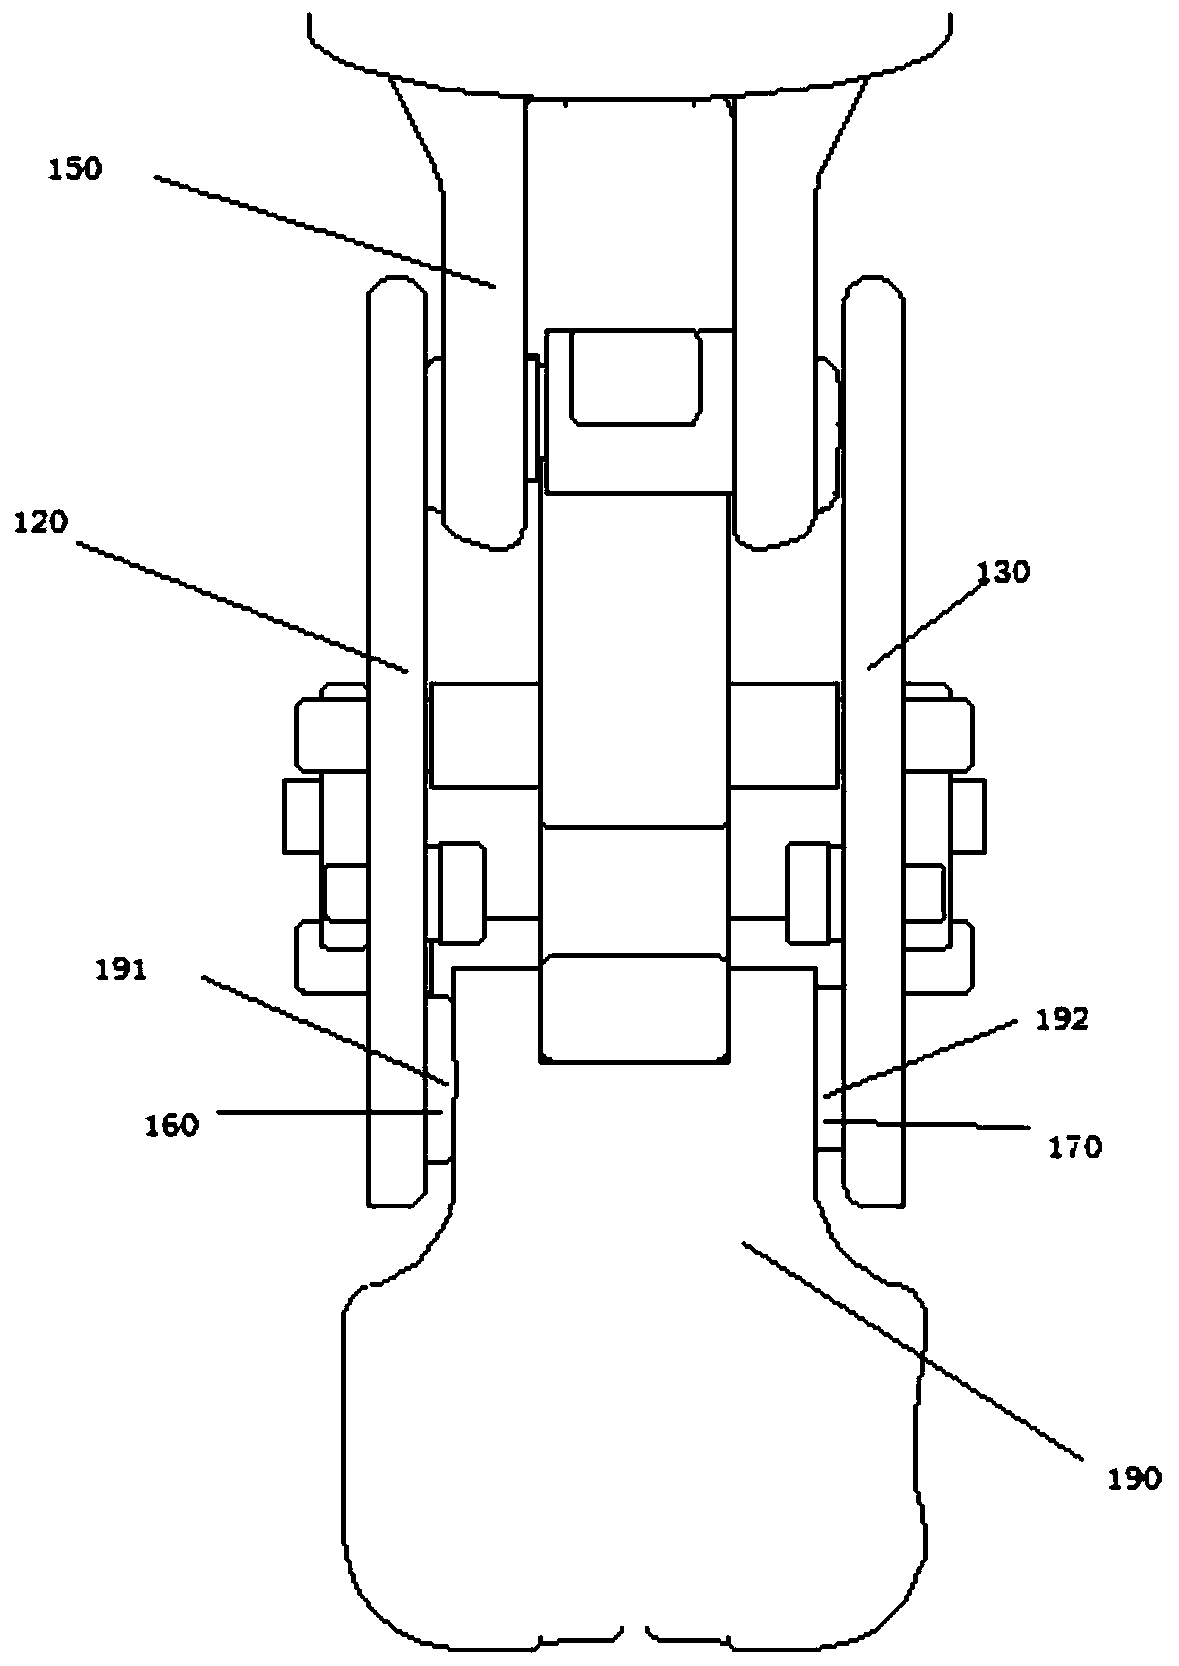 Deformable conductive connecting mechanism